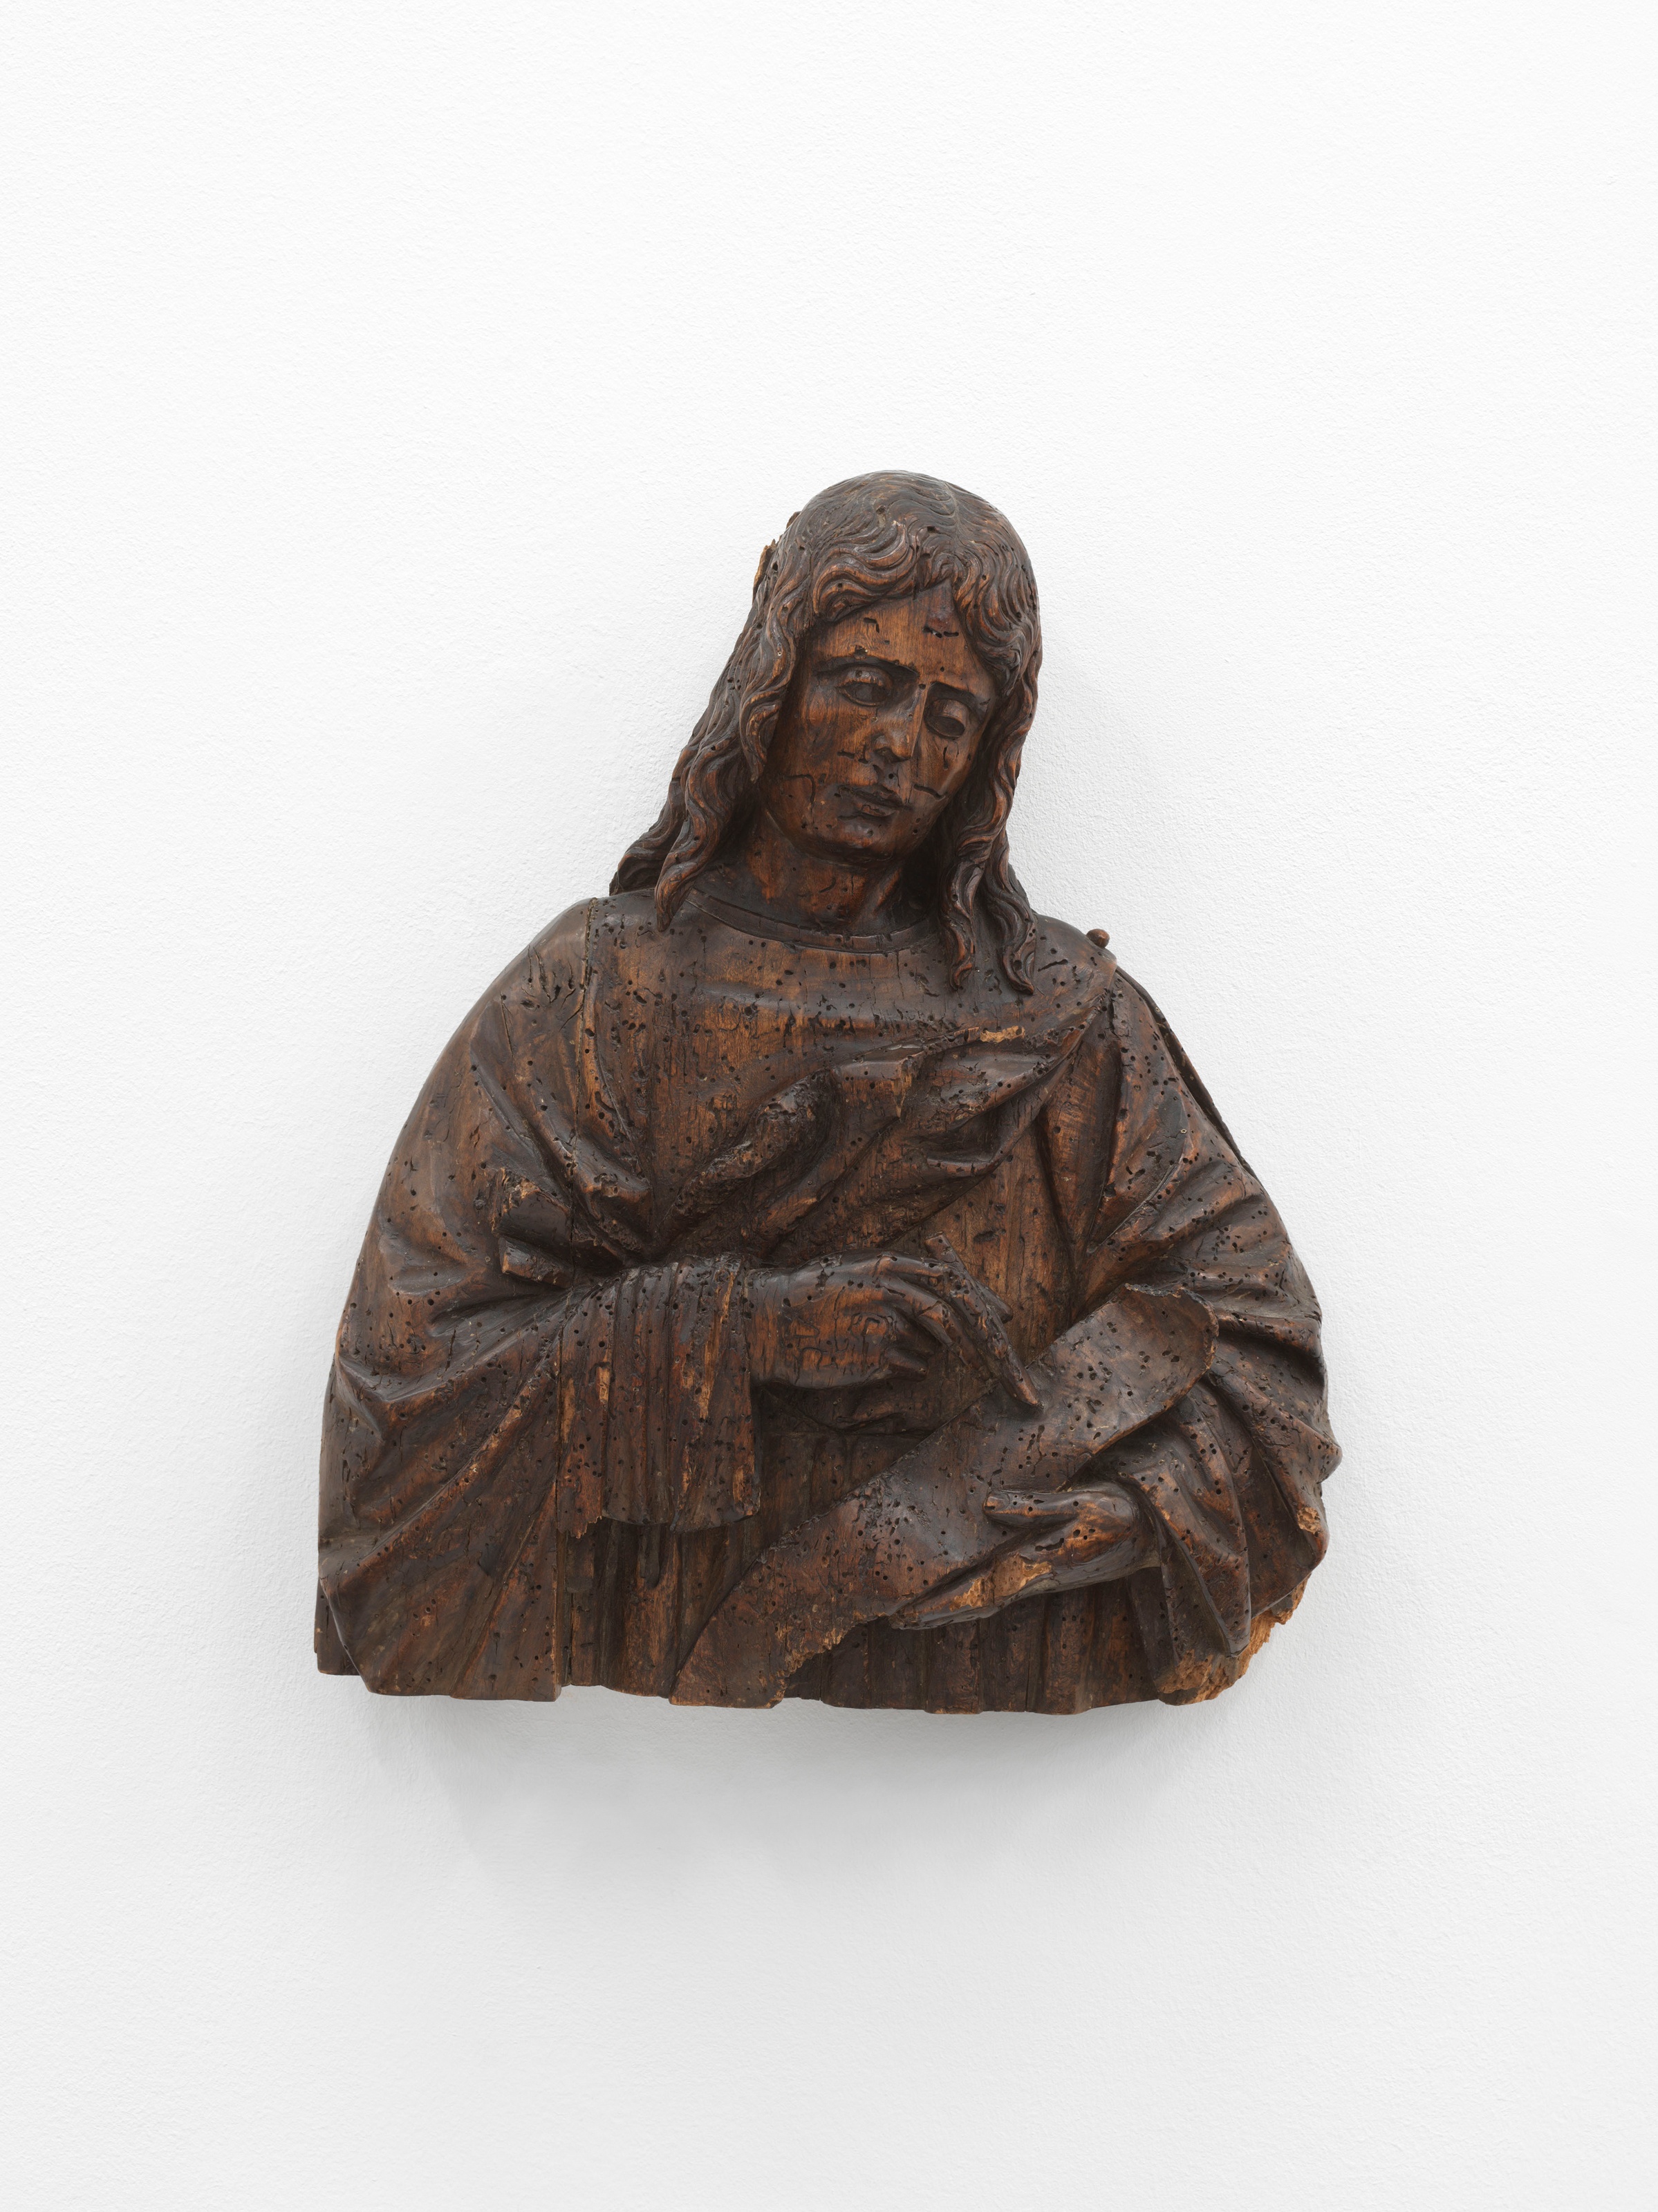 Unknown artistSaint John Evangelist, 16th centuryNorthern Italy or Germany, carved wood50 x 45 x 30 cm | 19 2/3 x 17 3/4 x 11 3/4 in